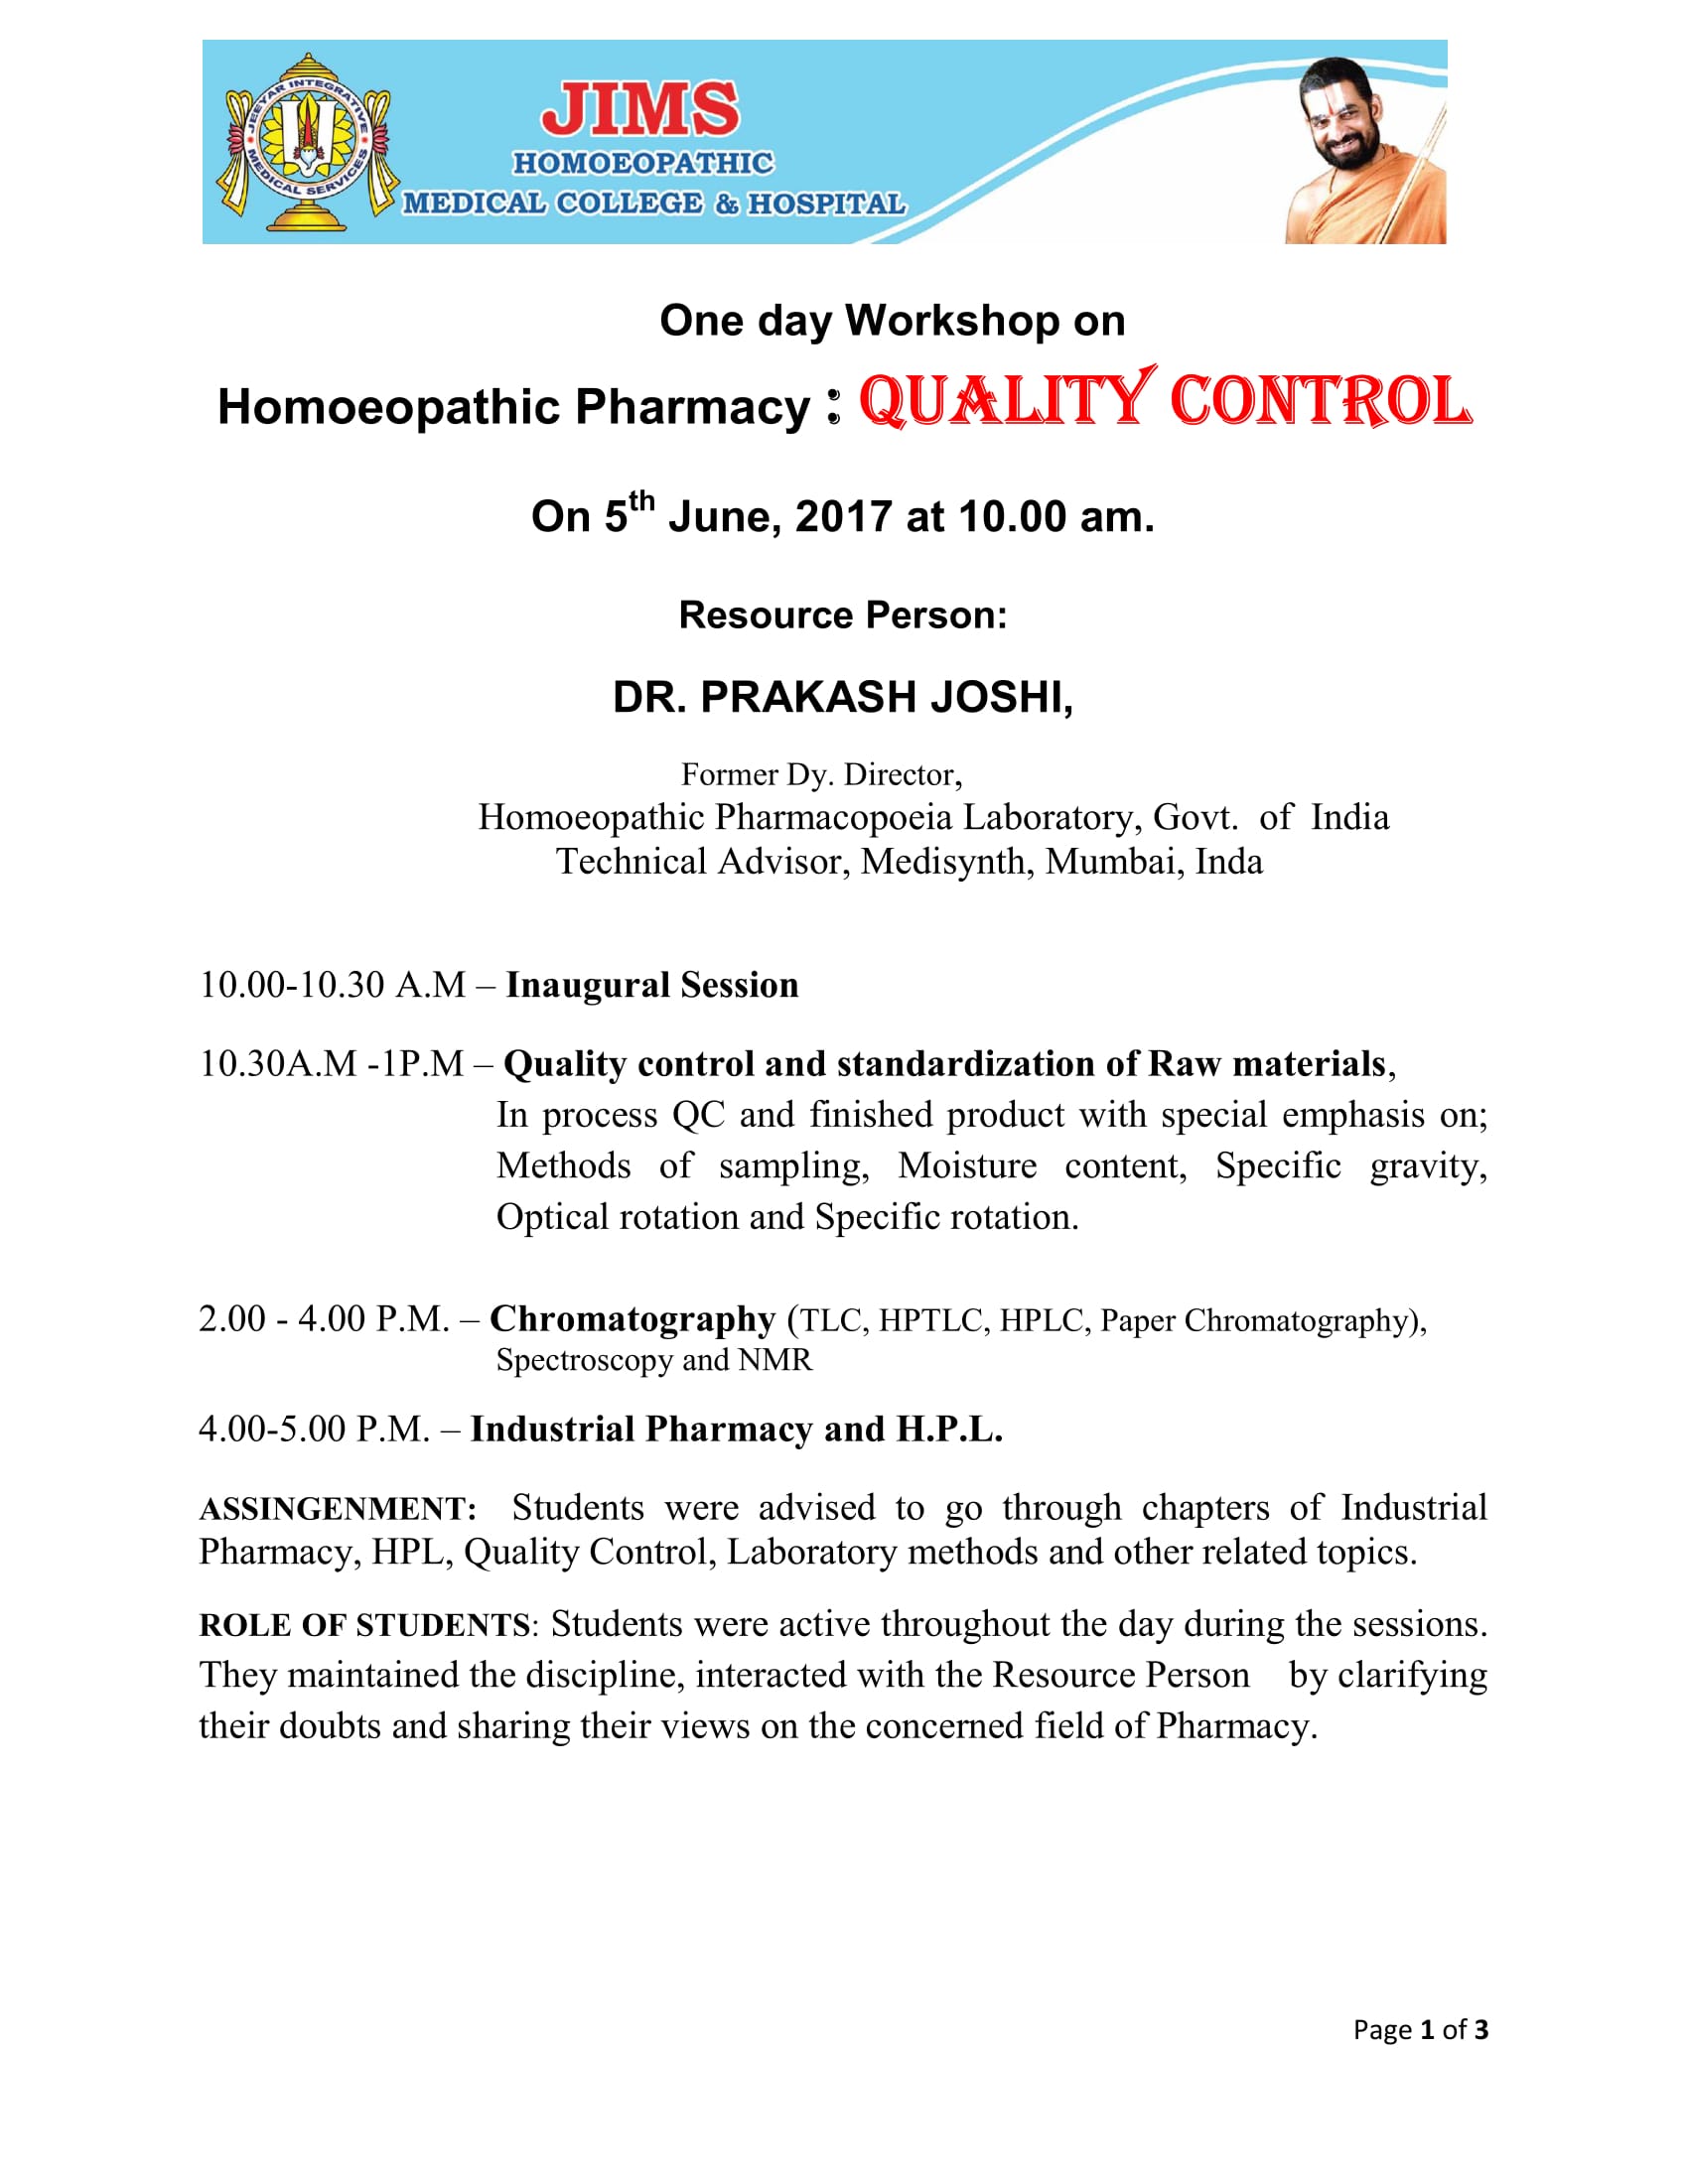 One day Workshop on Homoeopathic Pharmacy : Quality Control